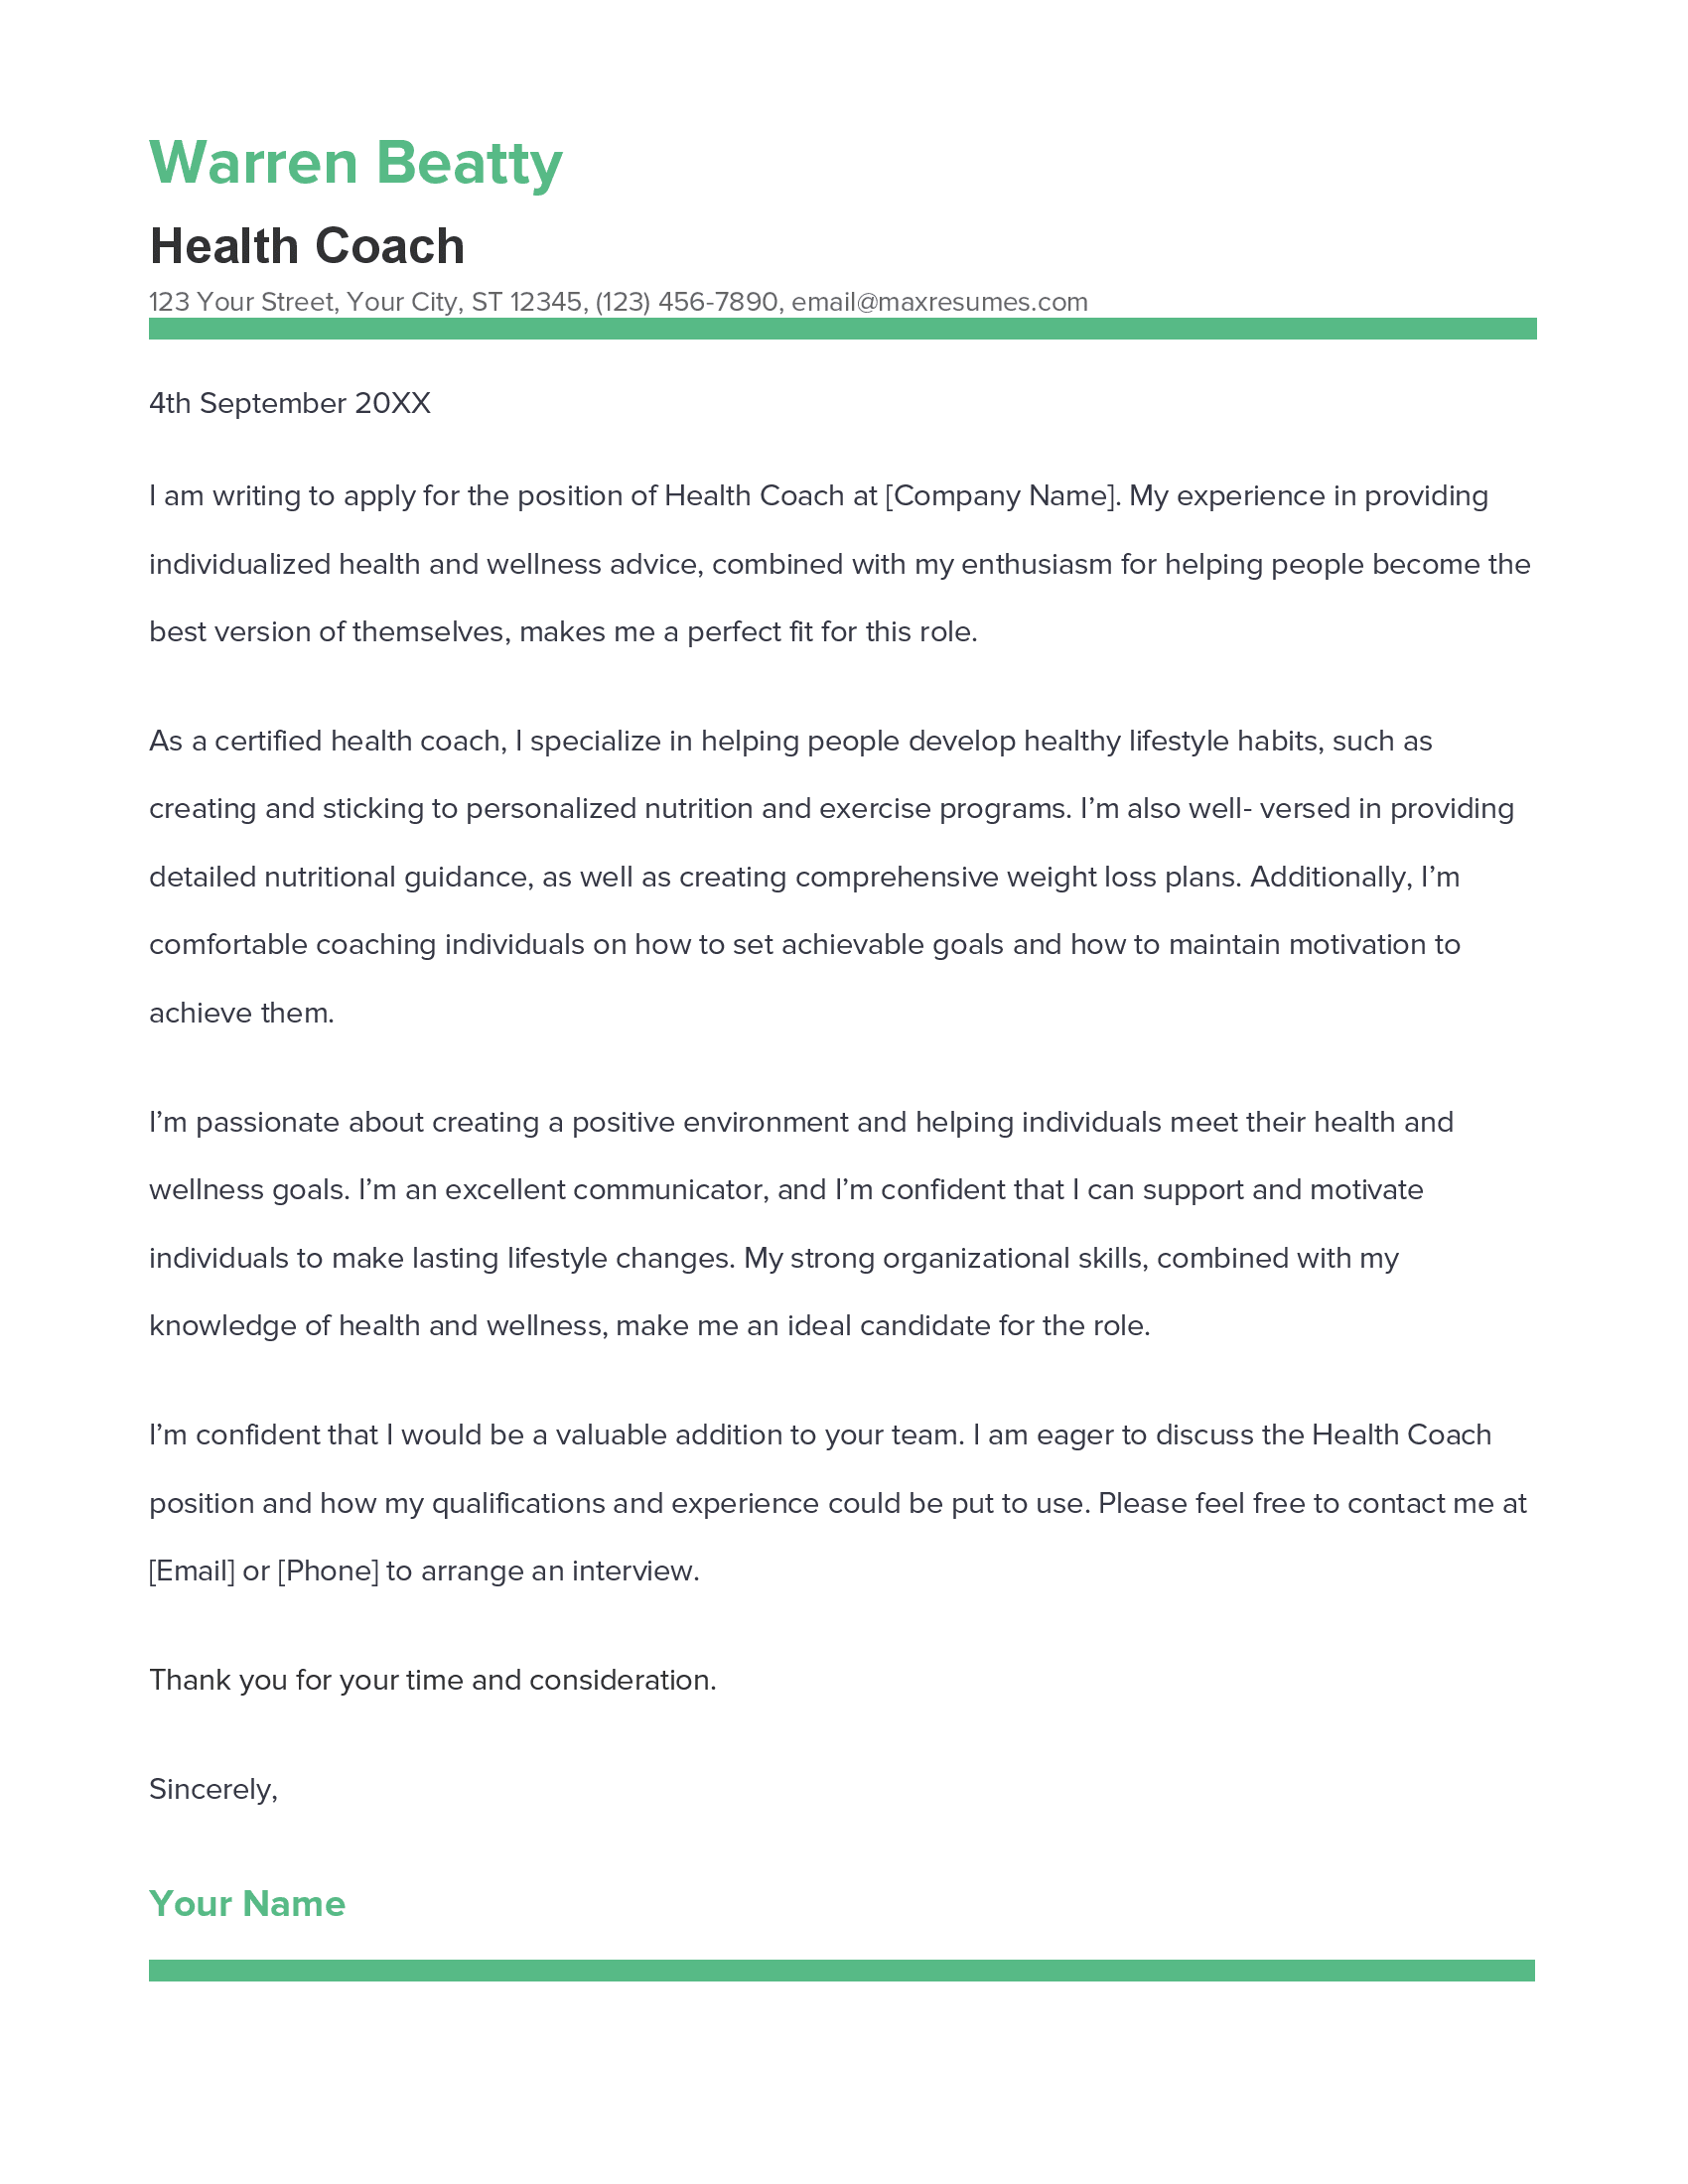 health coach cover letter sample